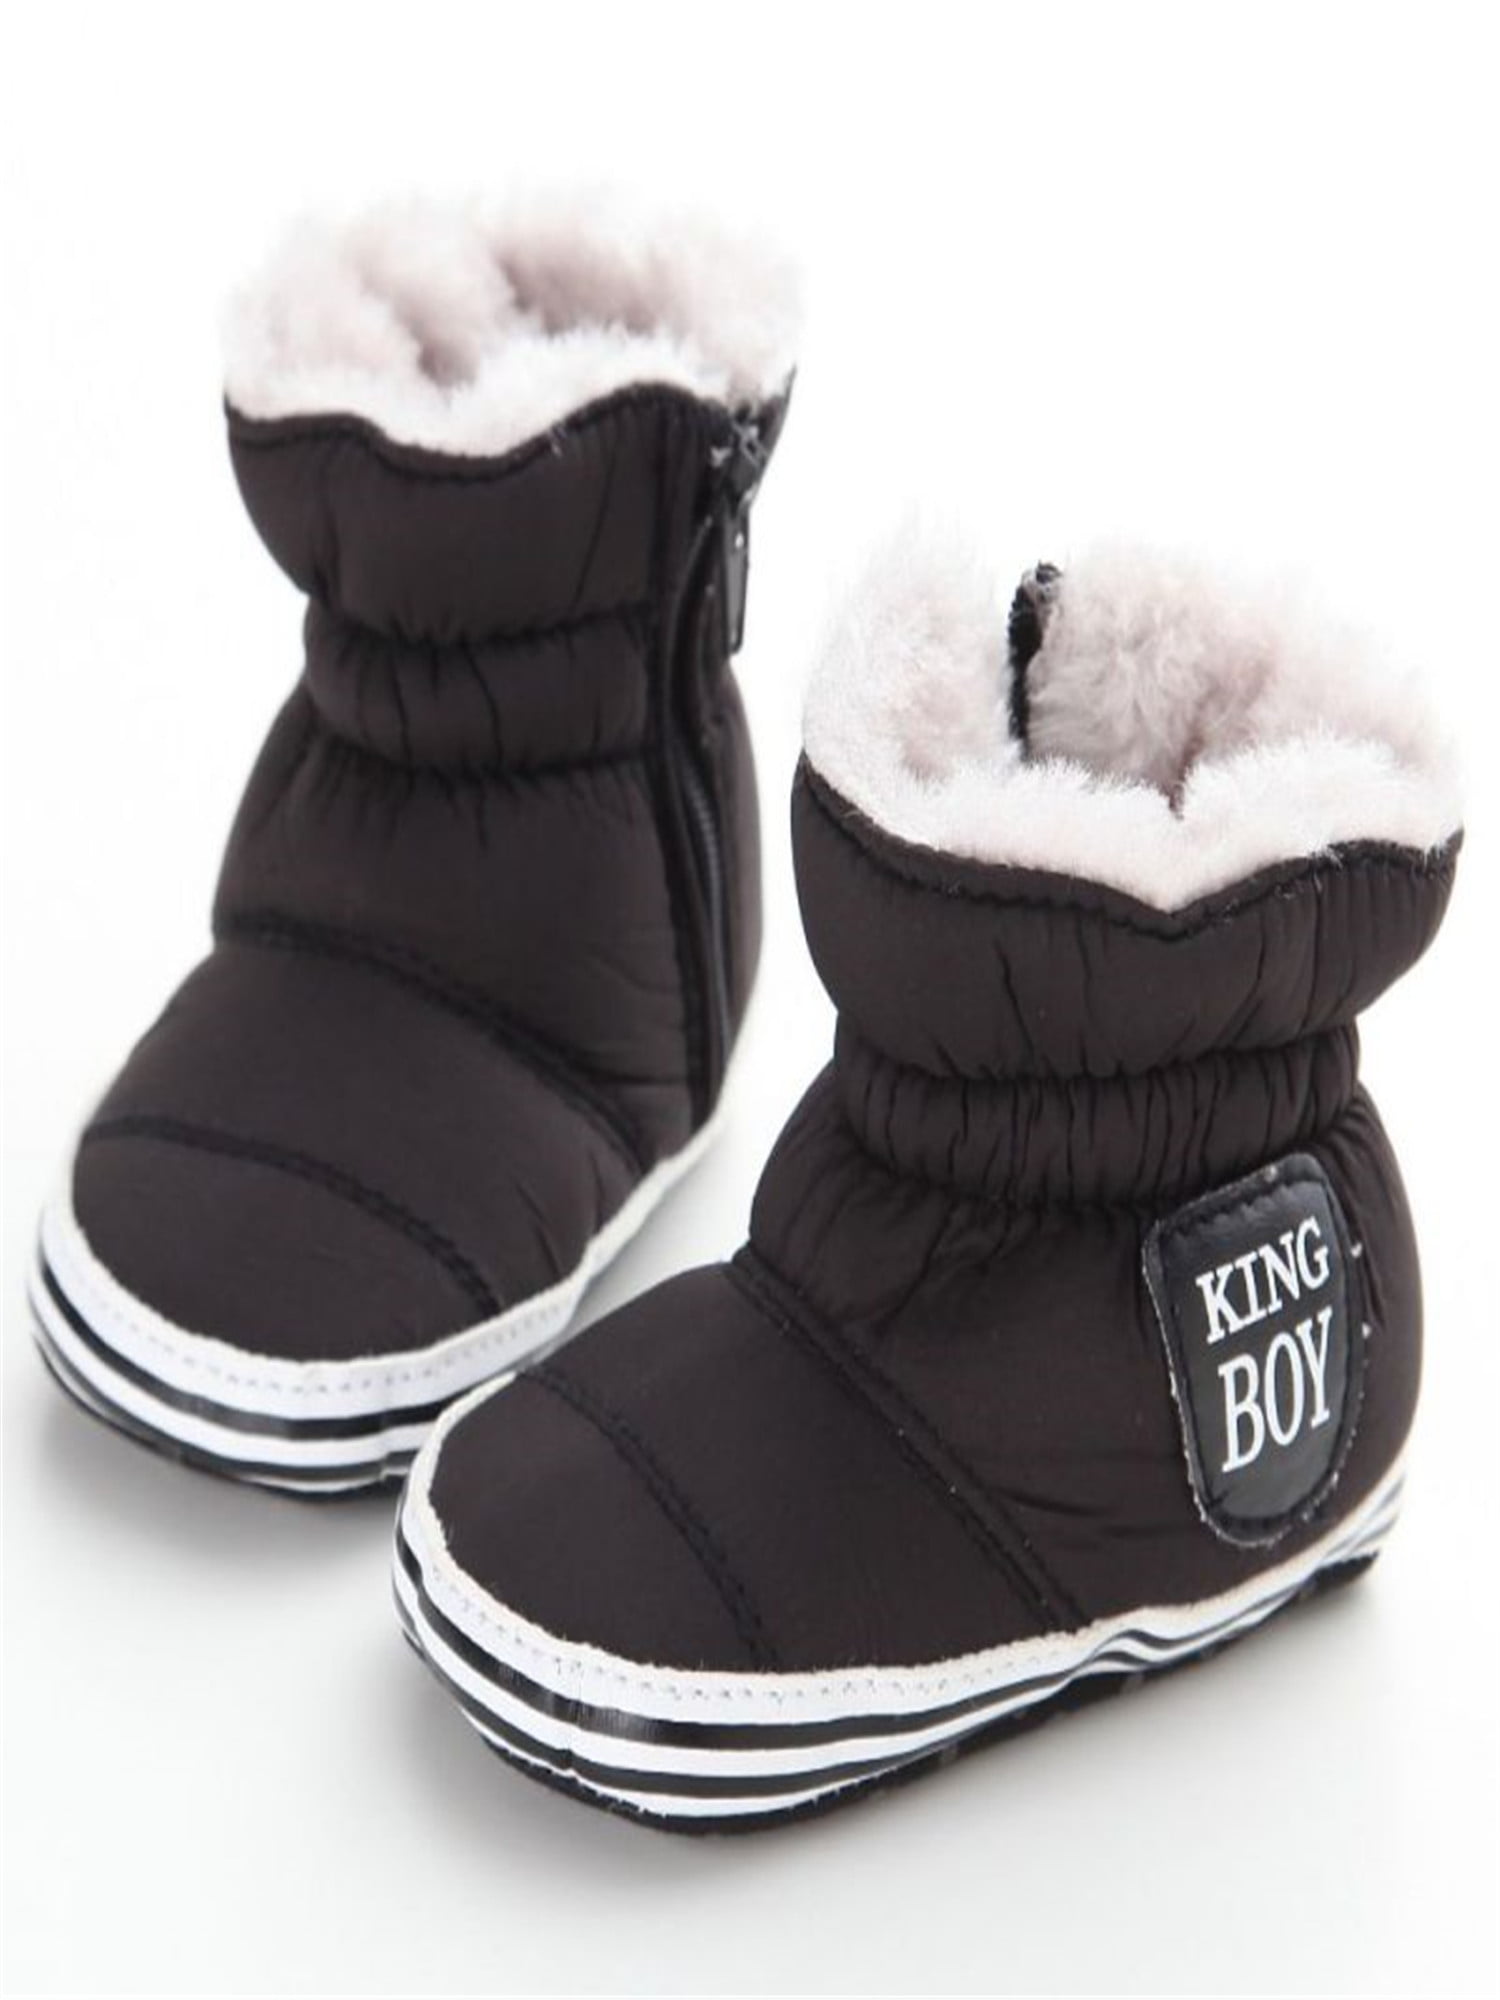 Baby Girl Boy Winter Warm Boots Newborn Toddler Infant Soft Sole Shoes Booties 